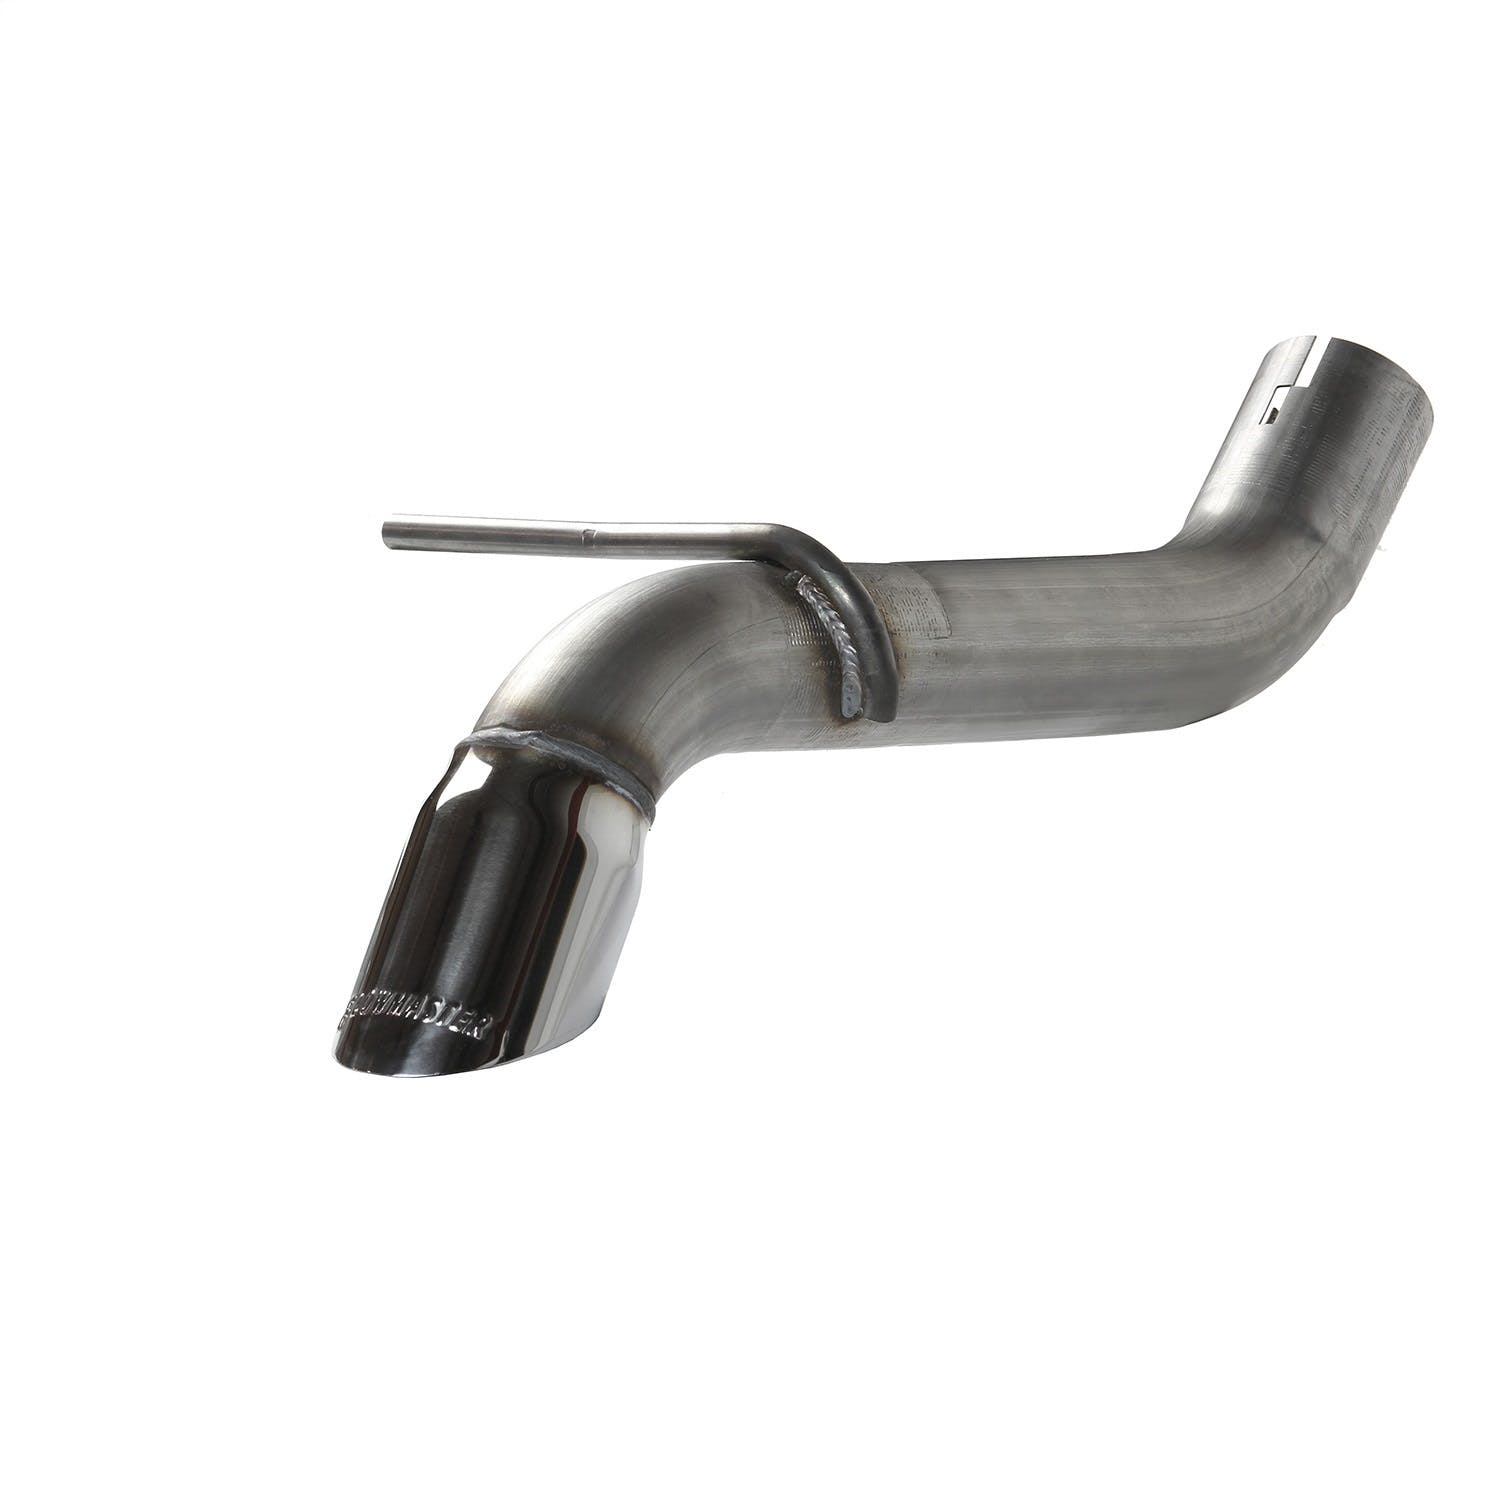 Flowmaster 817942 American Thunder Axle Back Exhaust System